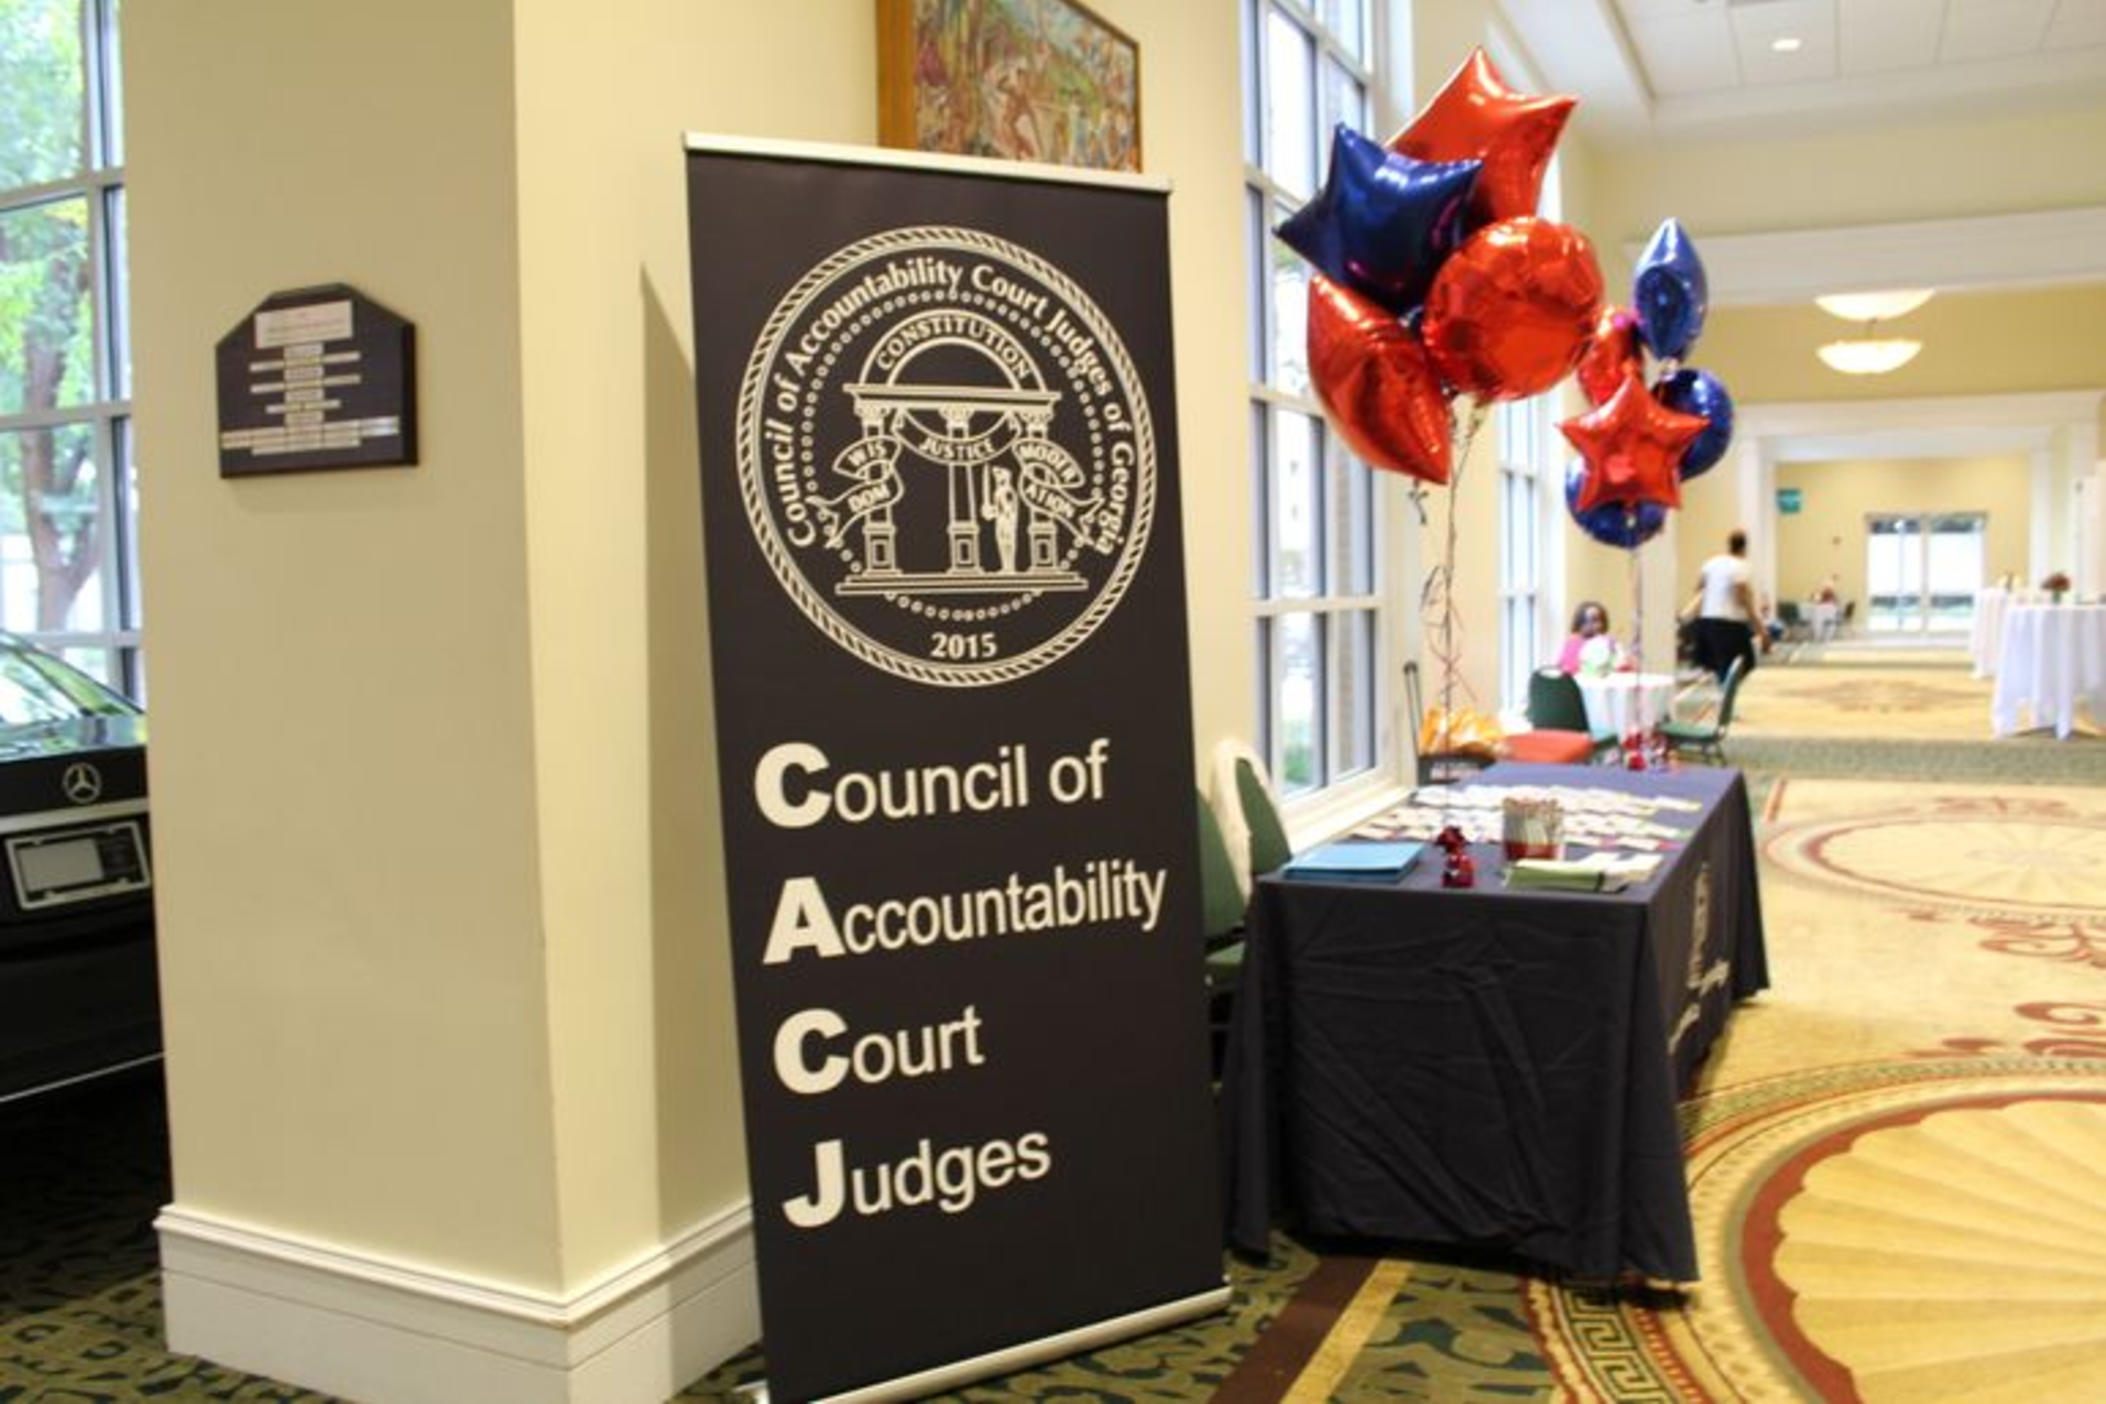 Council of Accountability Court Judges